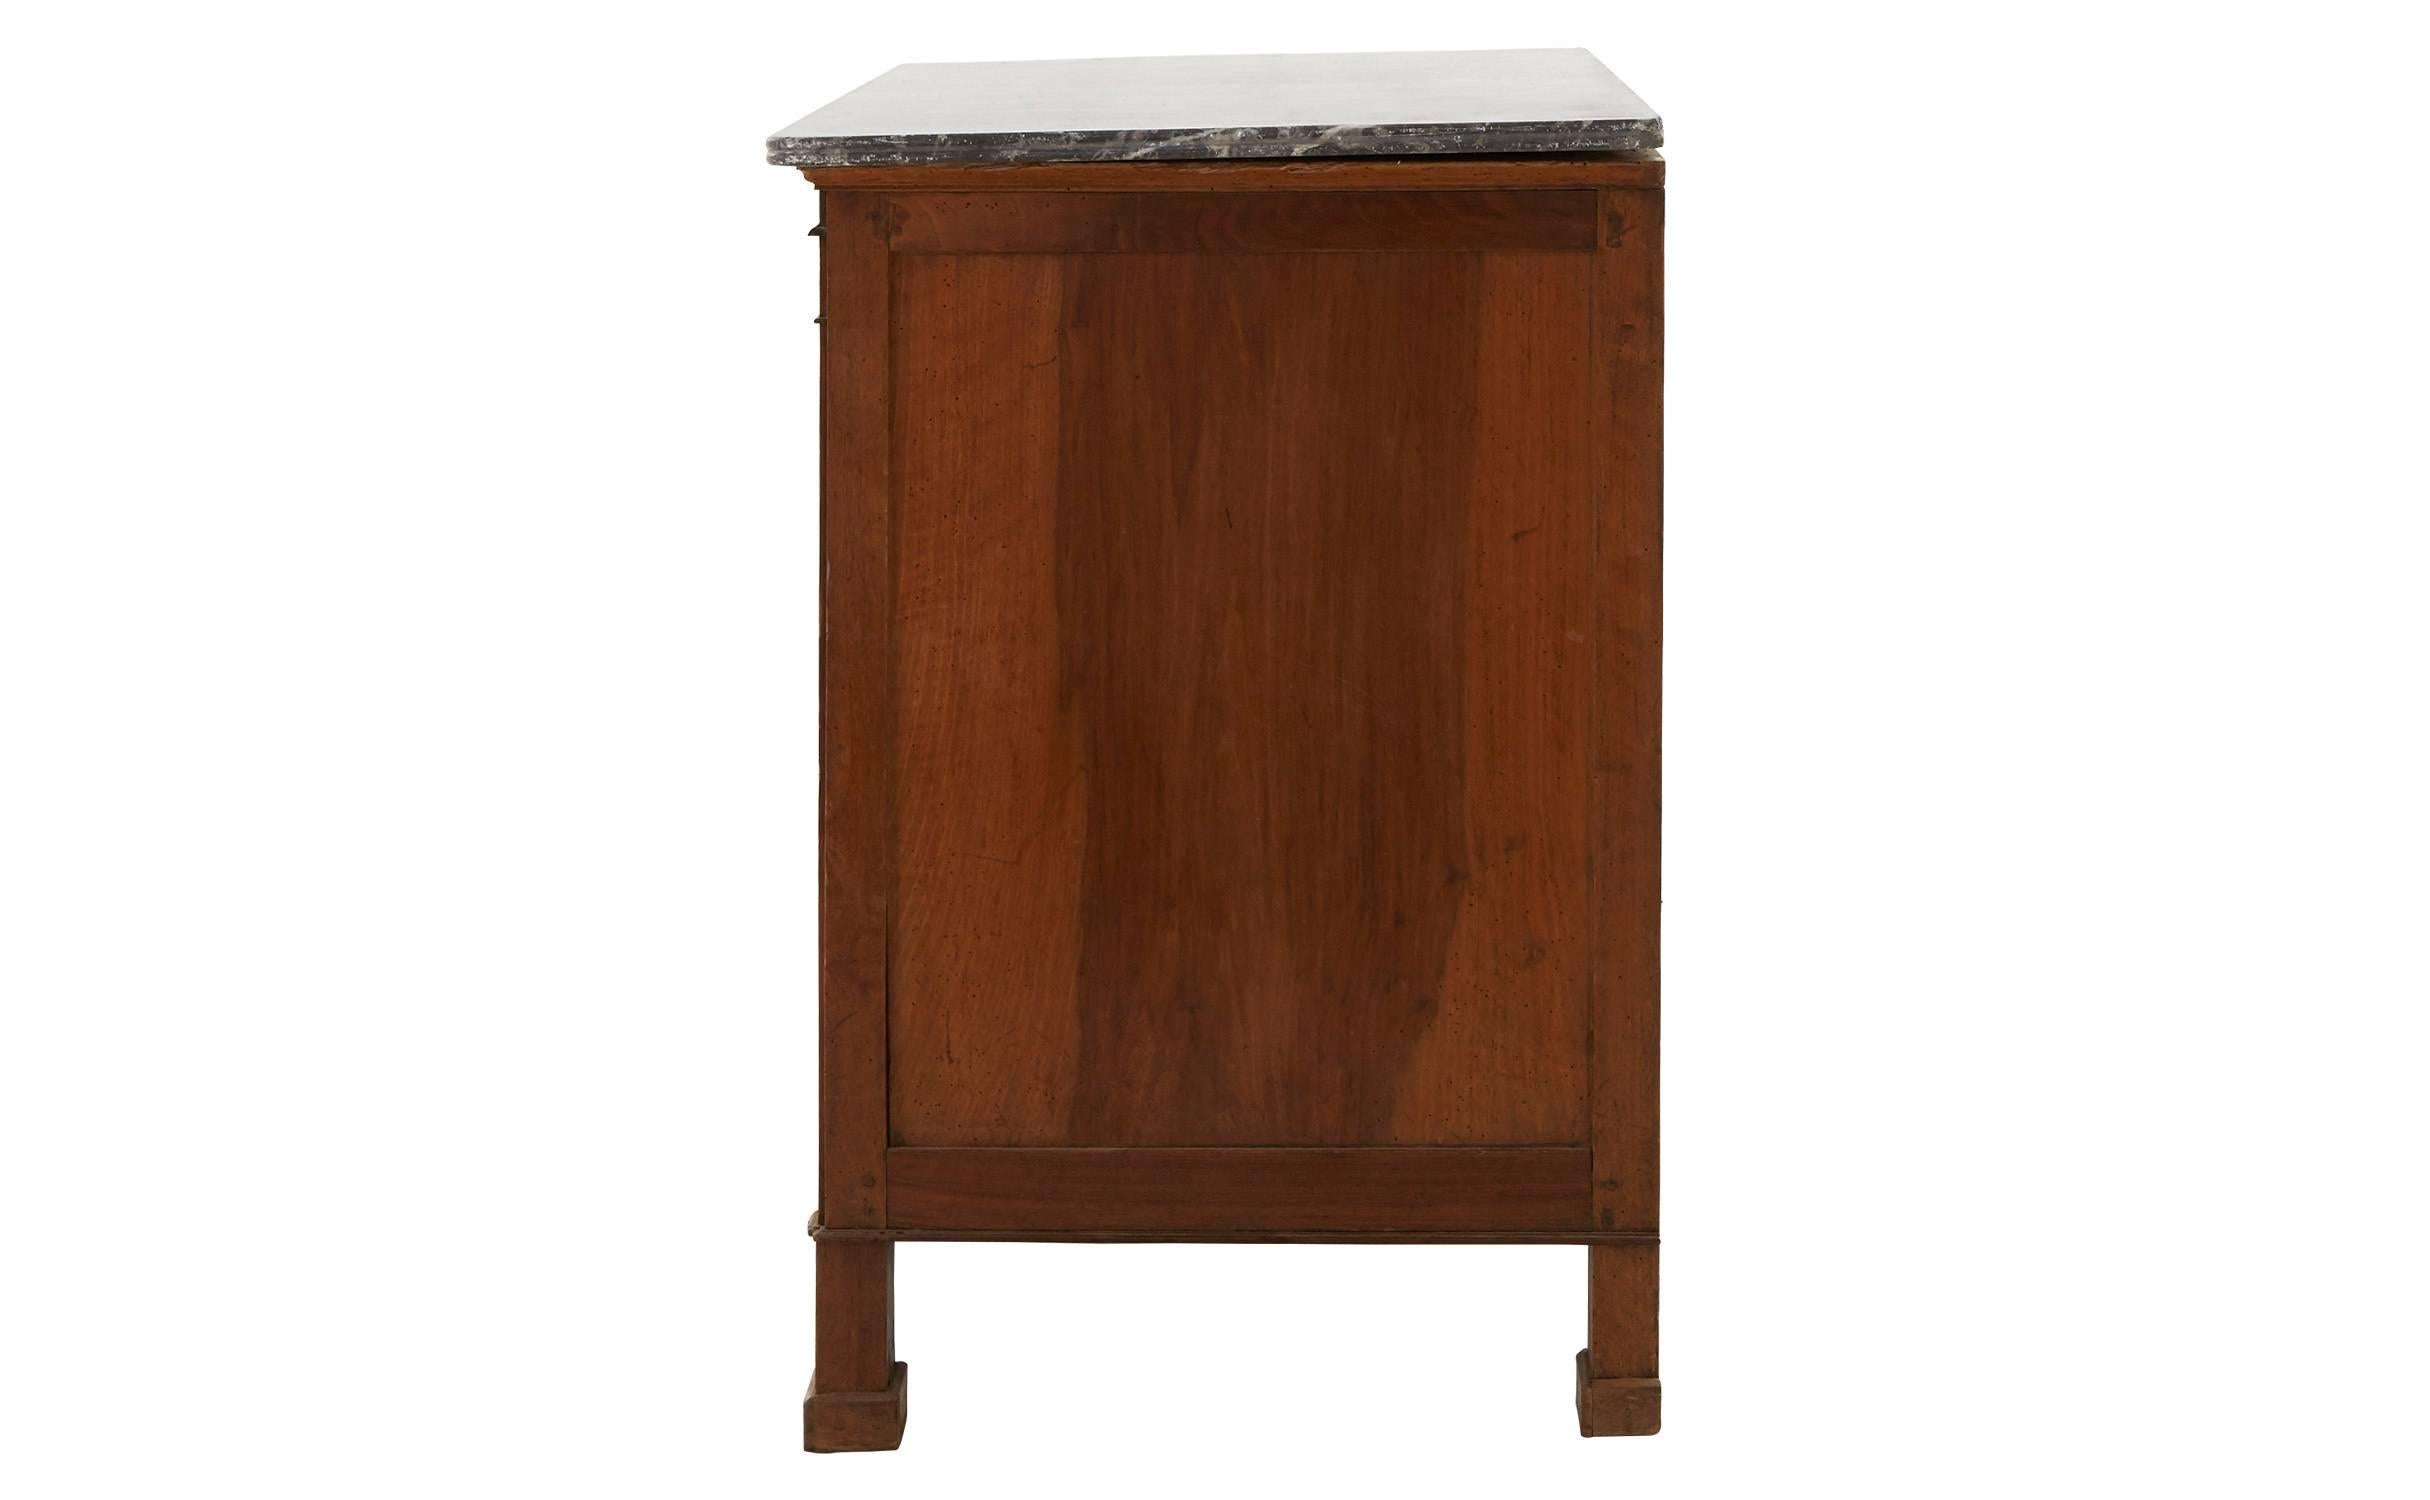 20th Century French Marble Commode